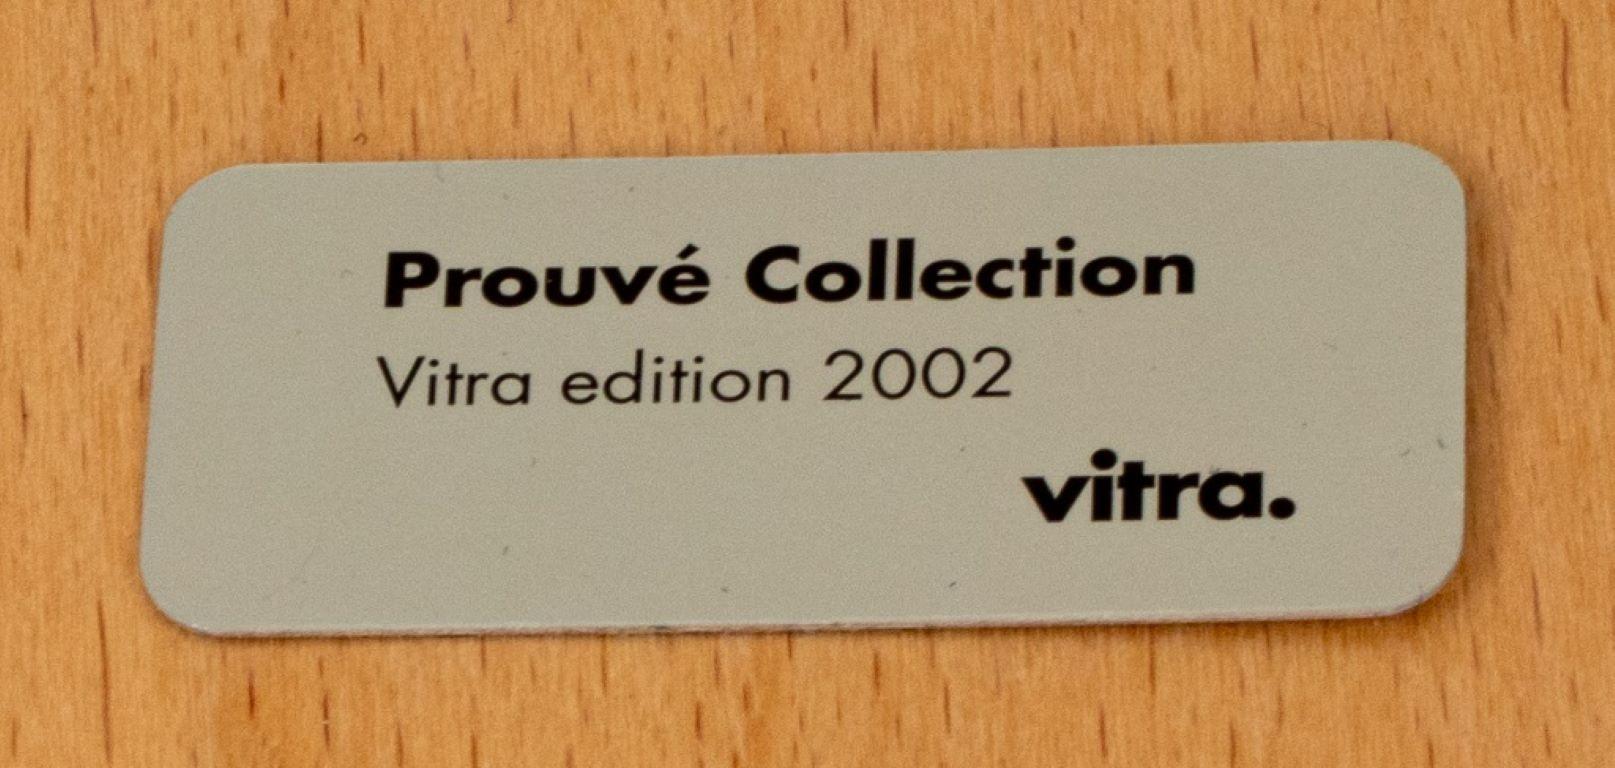 Jean Prouve Standard Chair for Vitra Edition 2002 For Sale 1